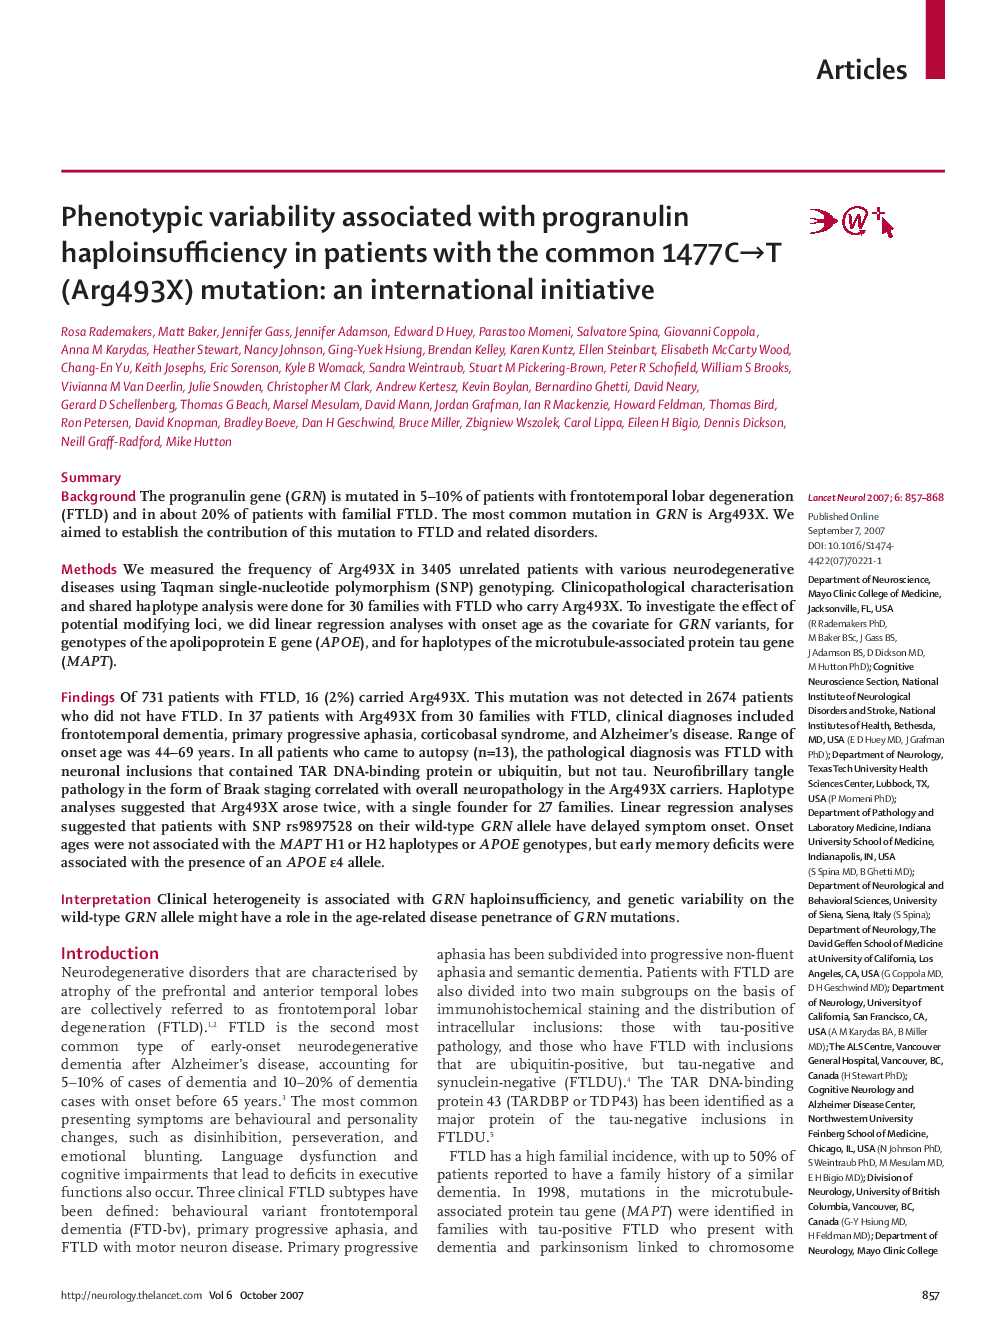 Phenotypic variability associated with progranulin haploinsufficiency in patients with the common 1477C→T (Arg493X) mutation: an international initiative